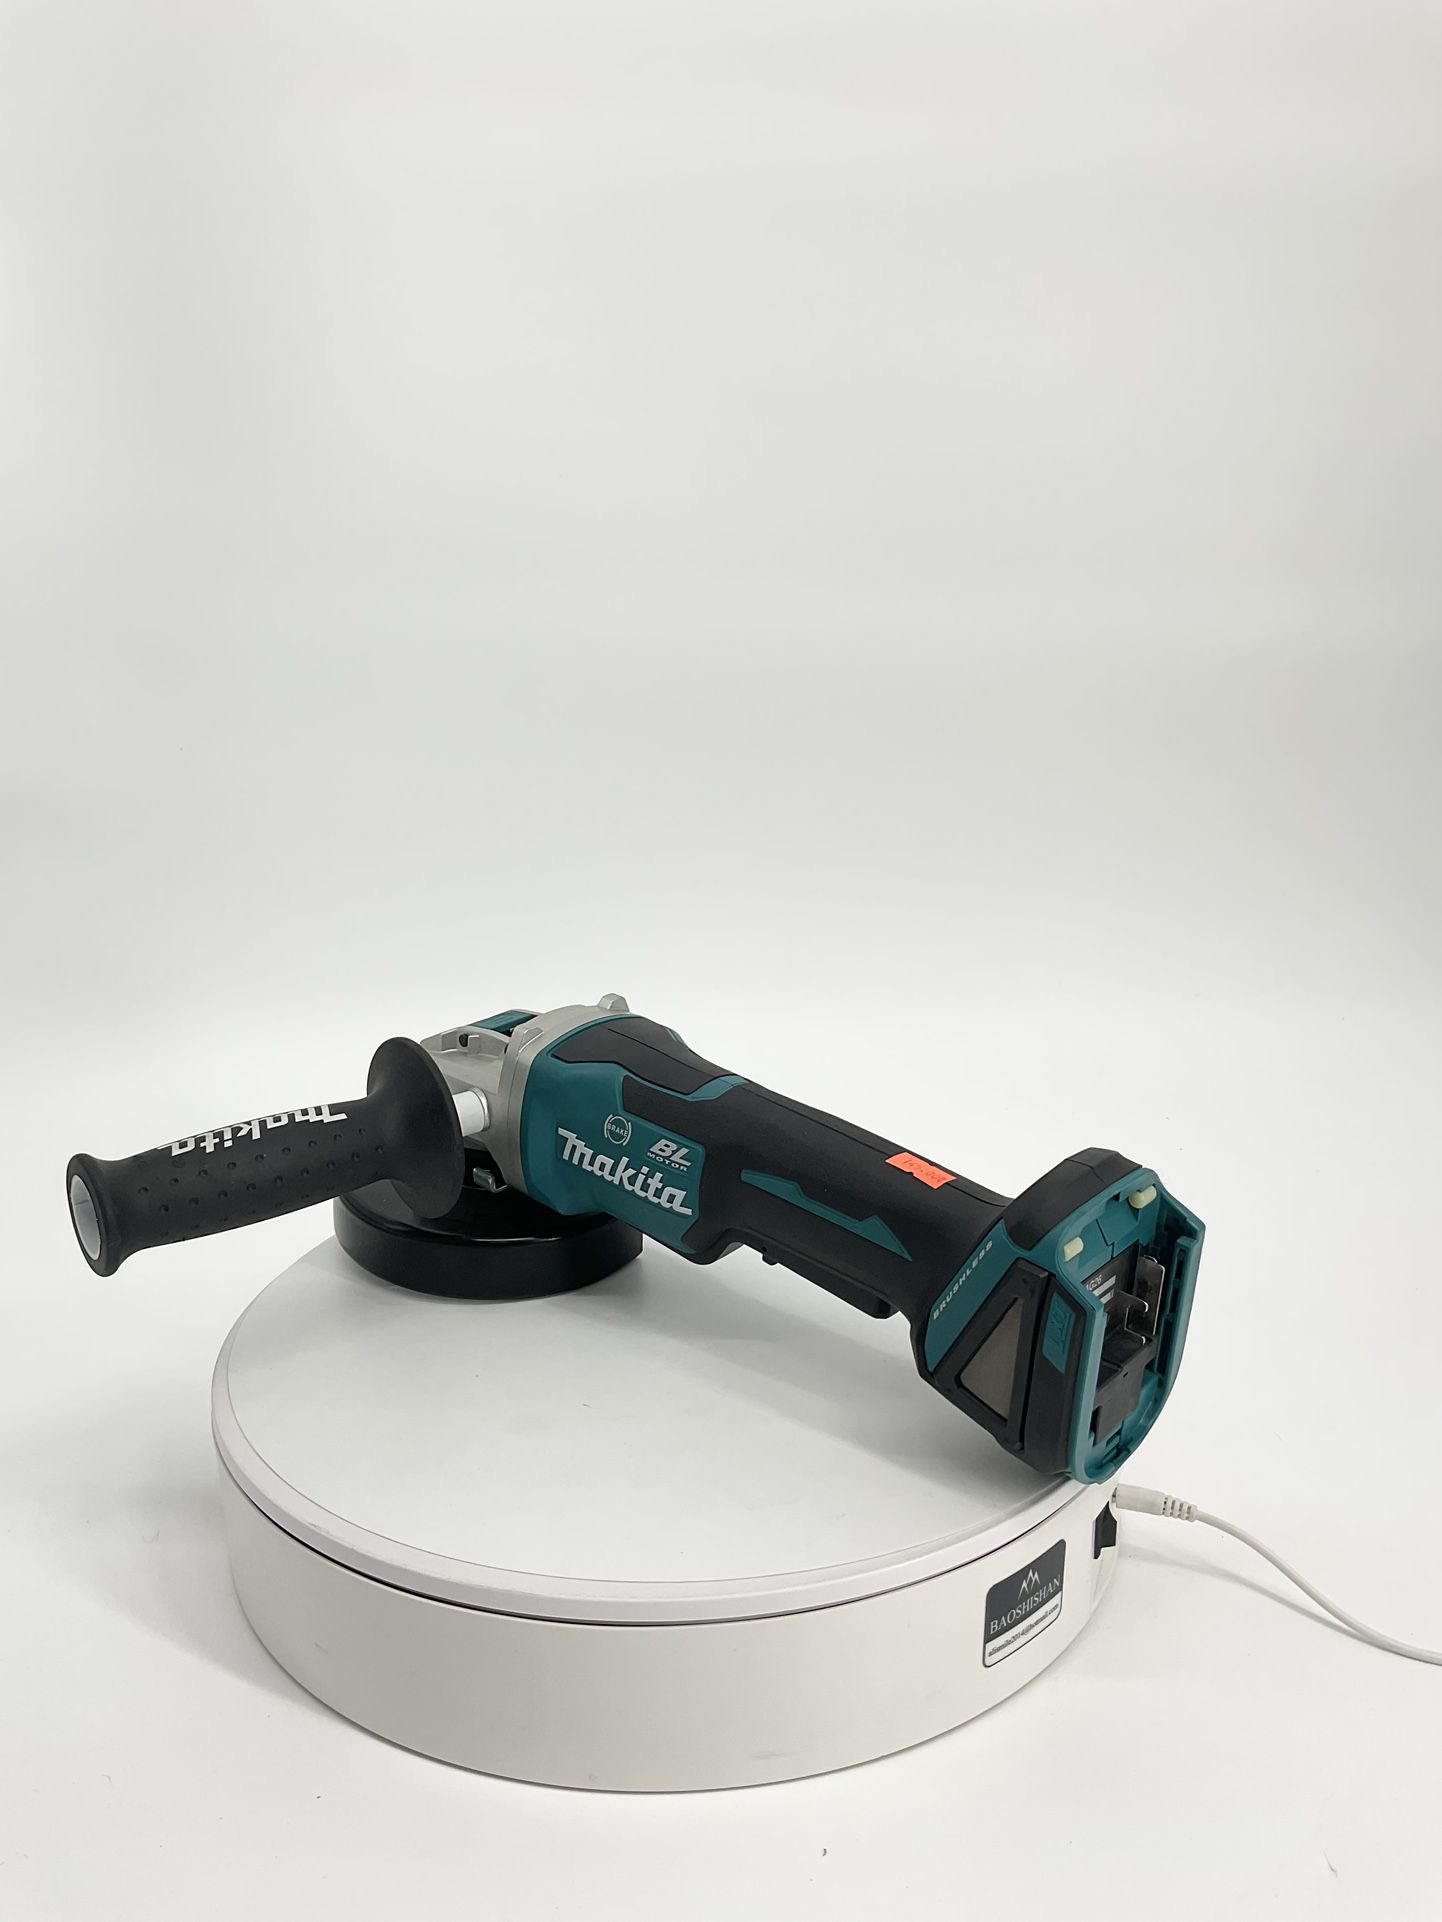 Makita 18V LXT Lithium-Ion Brushless Cordless 4-1/ 2 in. /5 in. X-LOCK Angle Grinder with AFT, Tool Only 